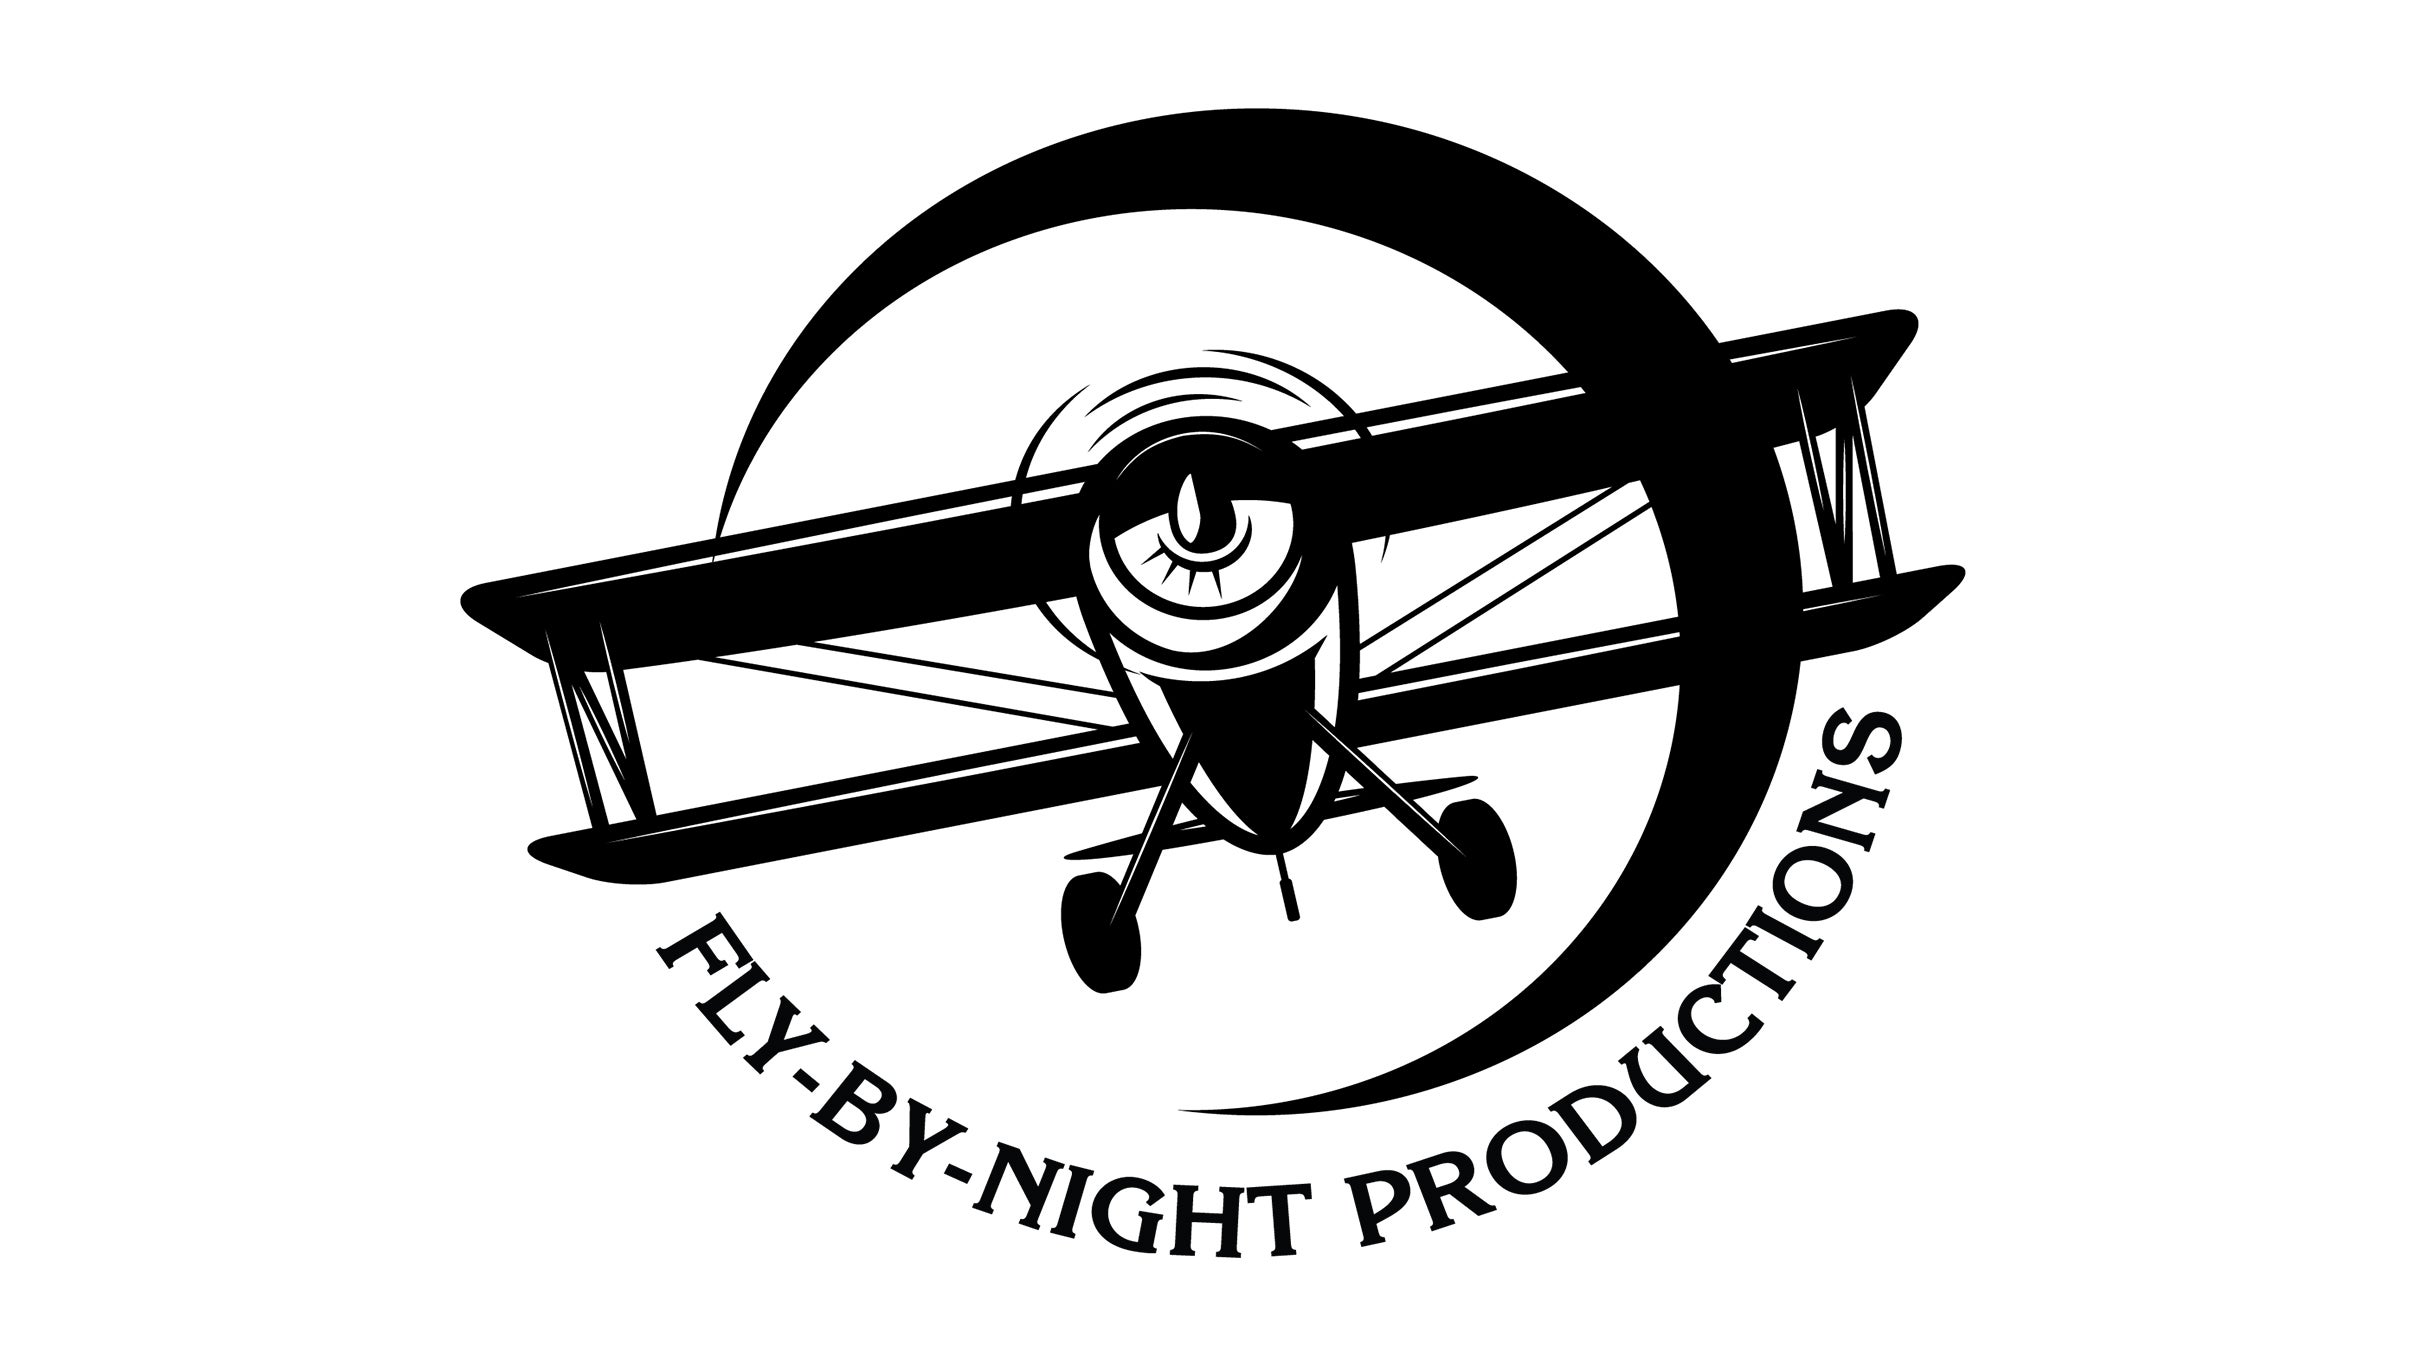 Fly-By-Night Productions: Terra Nova at Five Flags Center